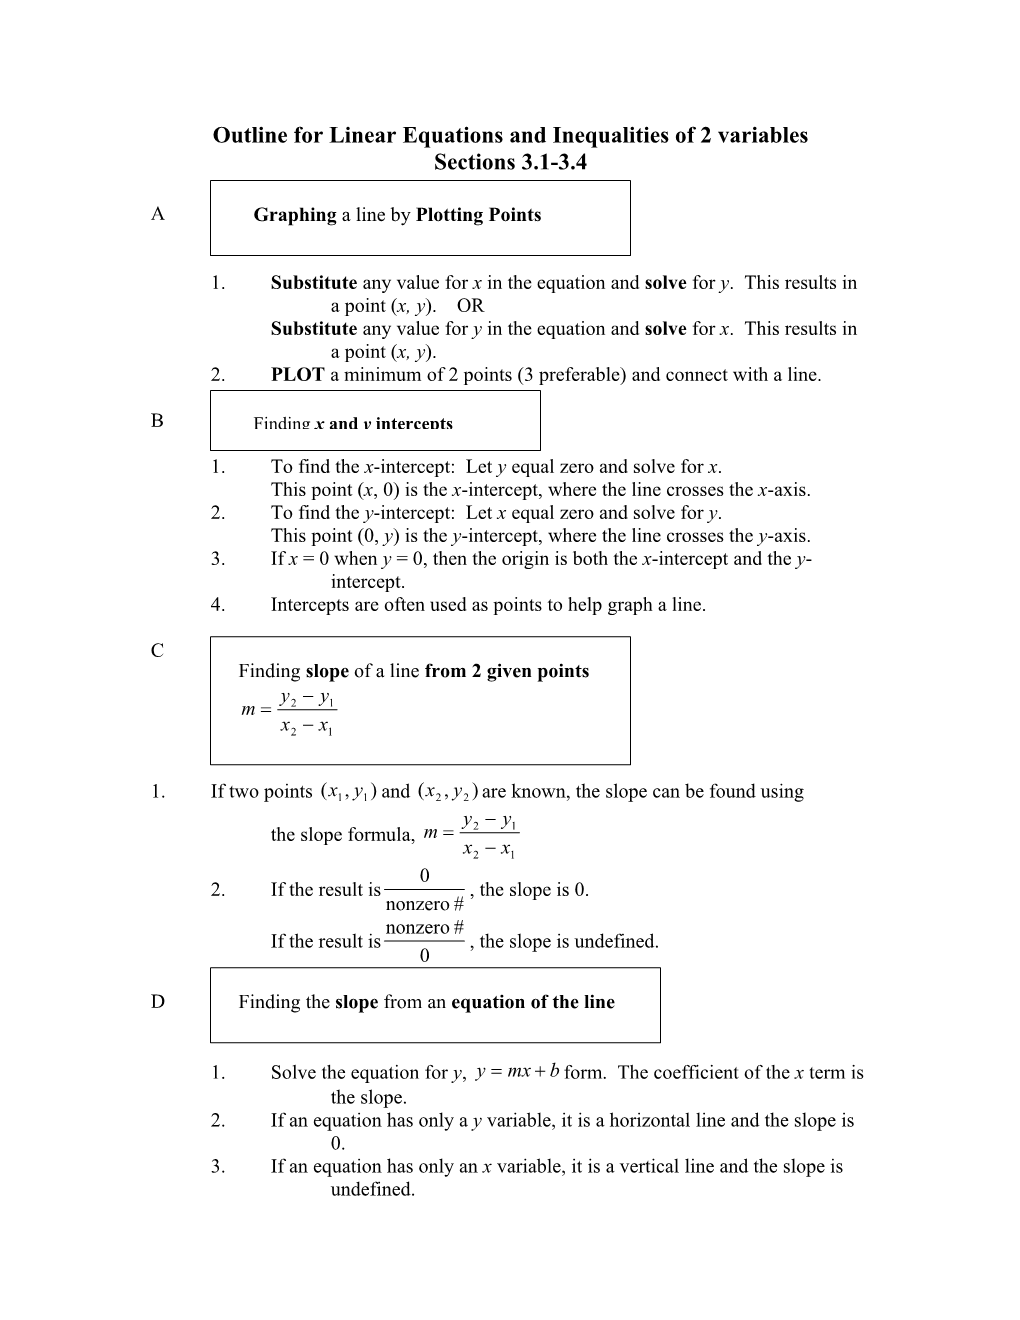 Outline for Linear Equations and Inequalities of 2 Variables